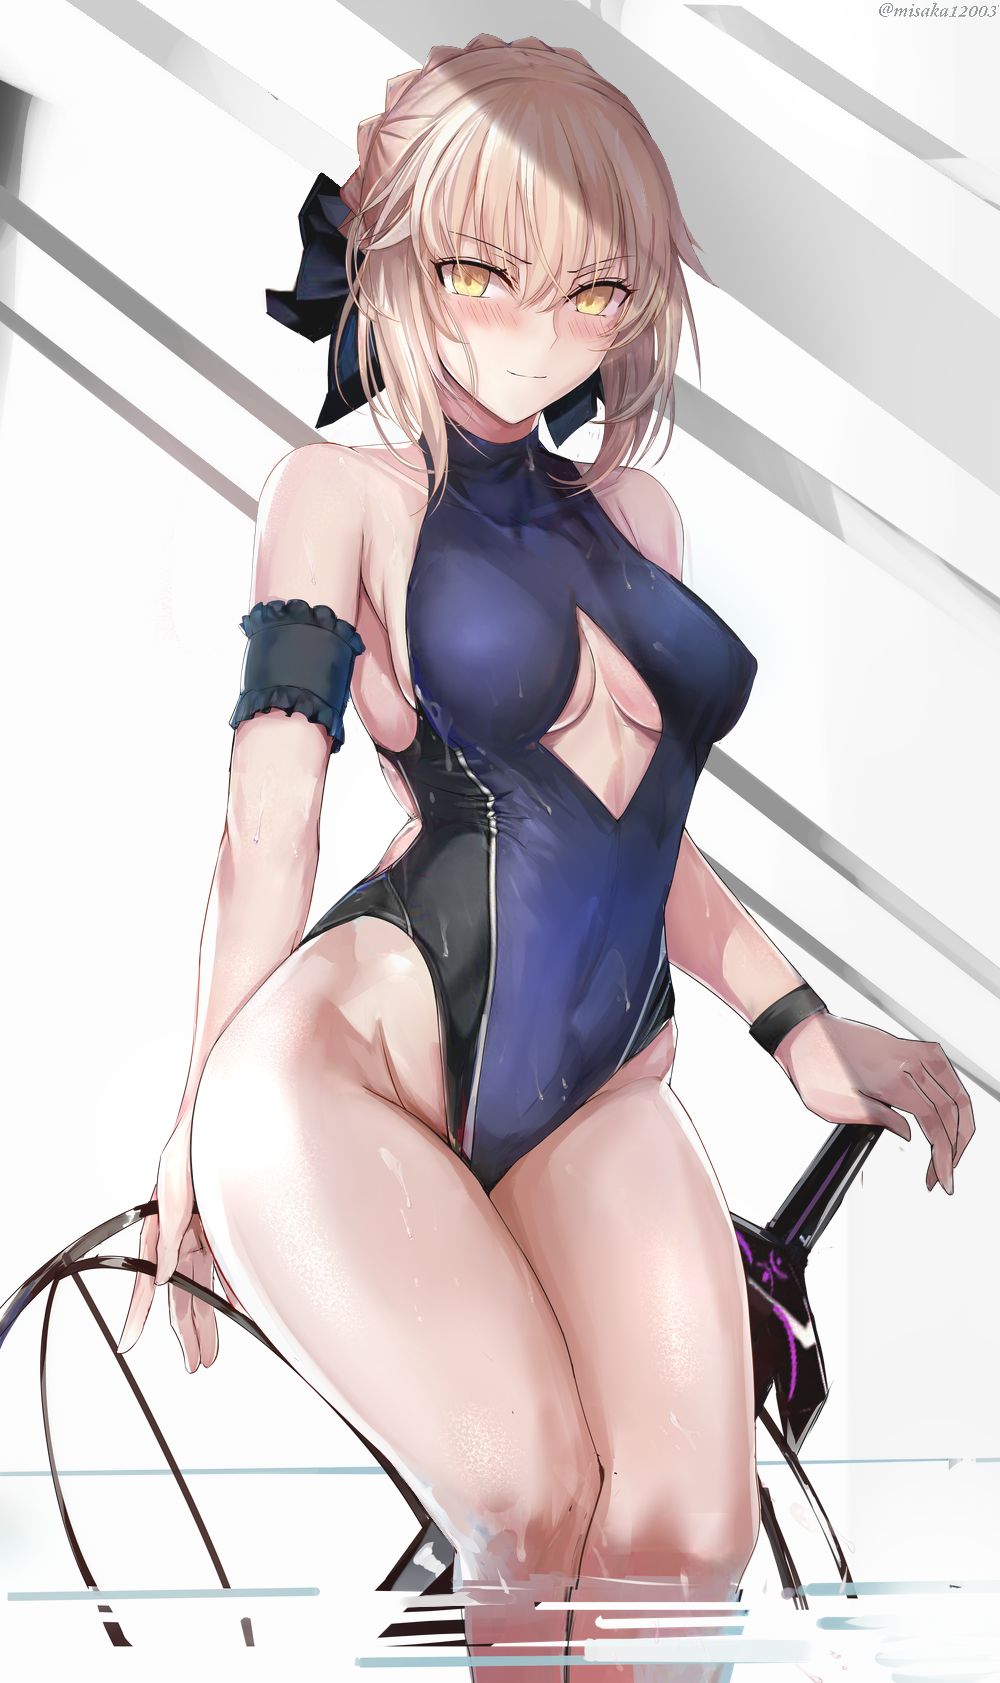 Anime 1000x1683 Fate series Altera (Fate) big boobs Artoria Pendragon (Alter) yellow eyes short hair anime girls artwork blushing standing in water MSK12003 wet one-piece swimsuit swimwear portrait display blonde wet body water cleavage